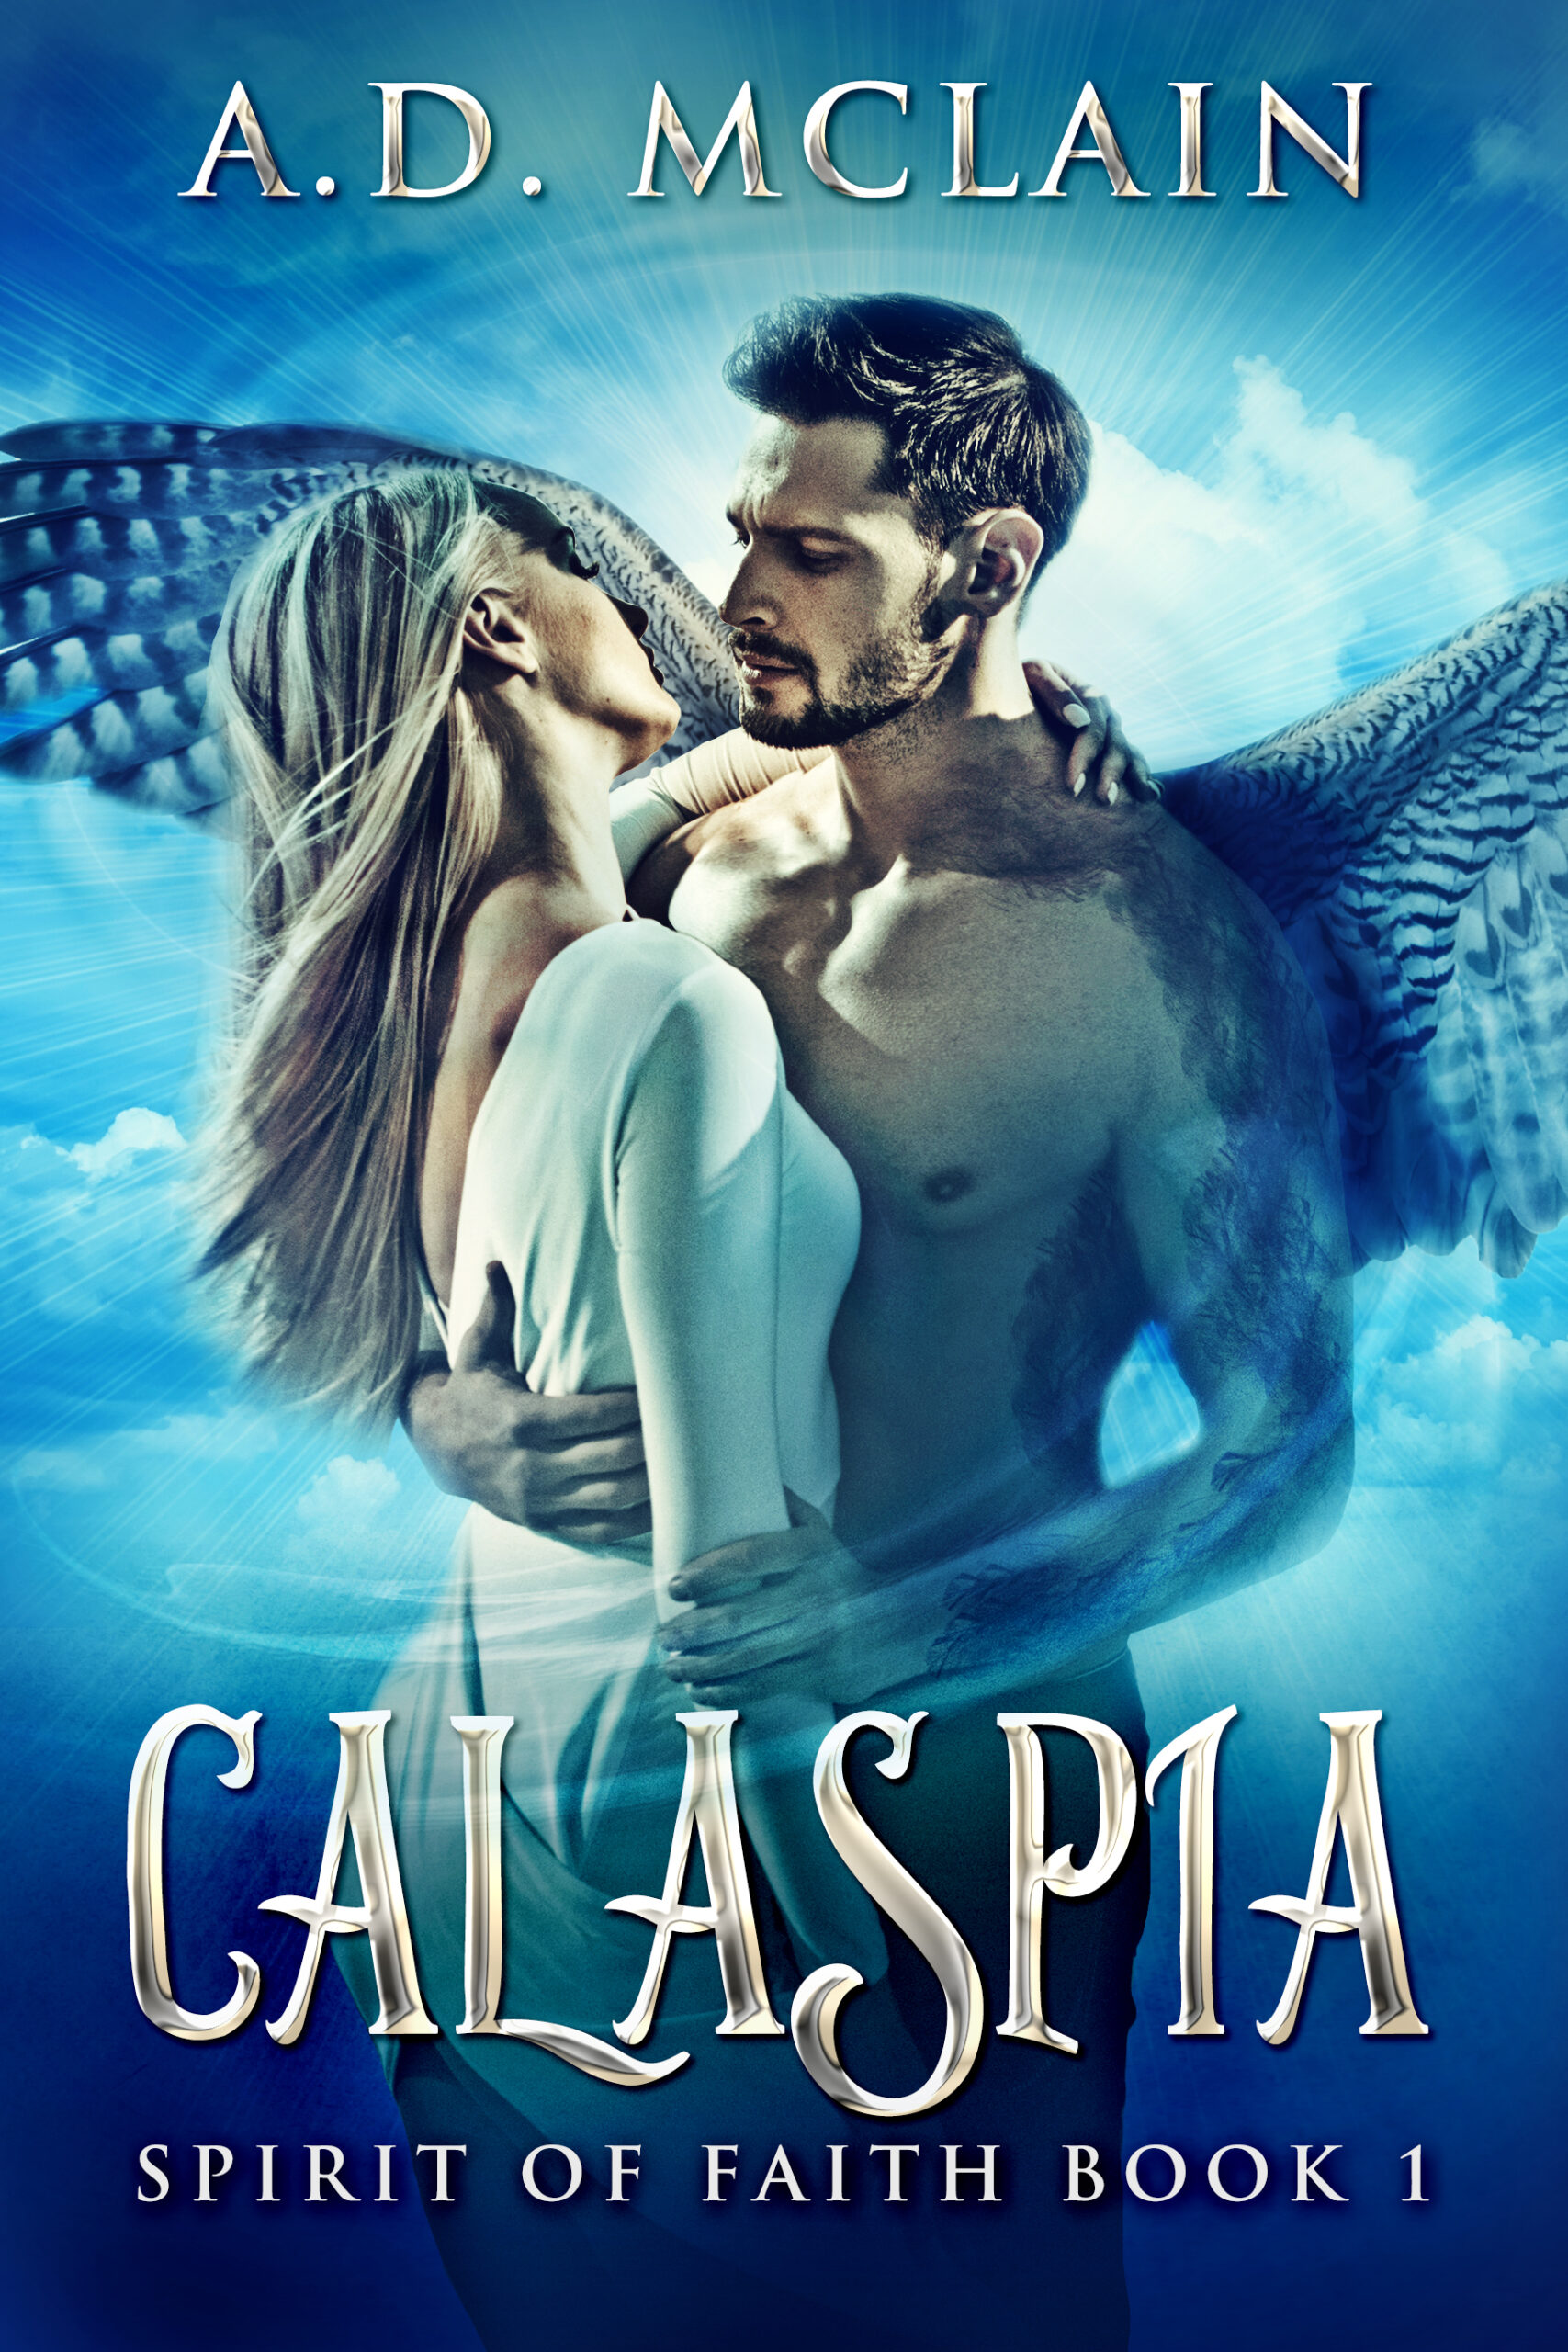 FREE: Calaspia by A.D. McLain